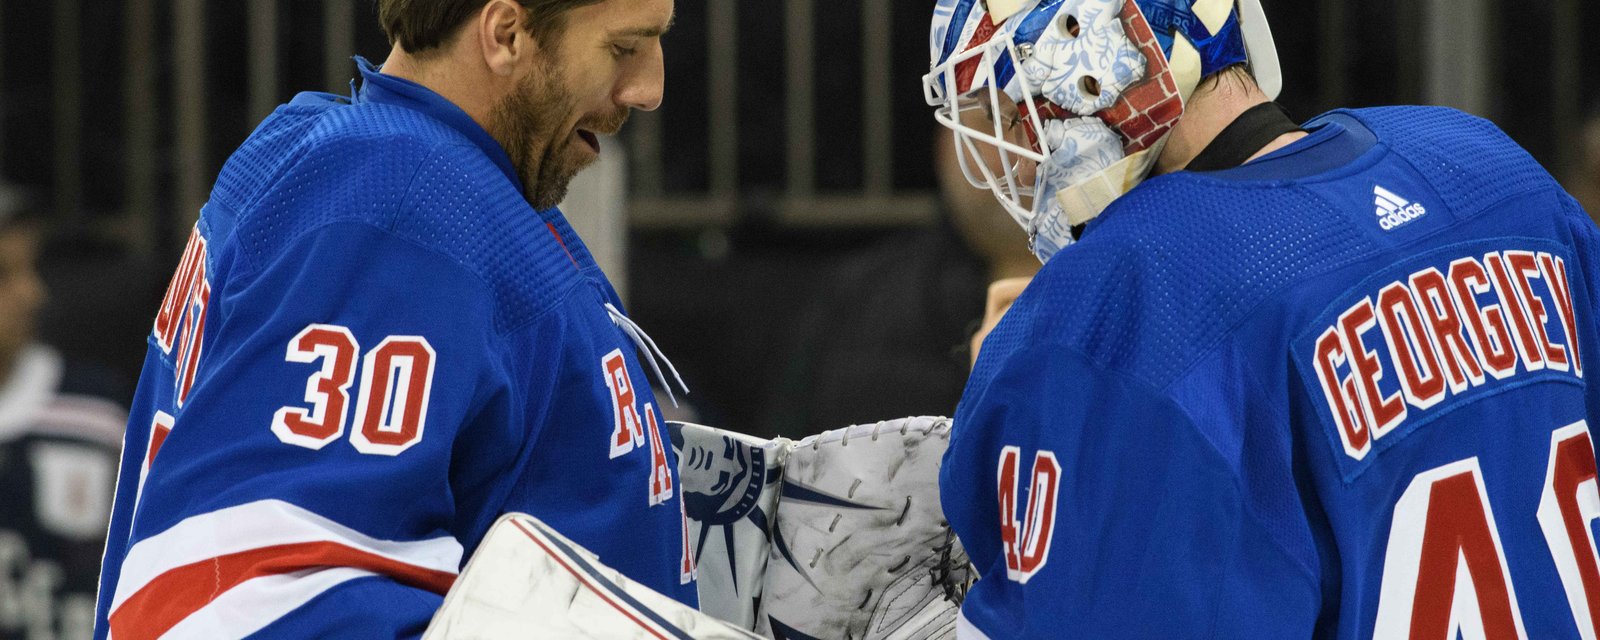 Rangers hope to keep the run going against the Canes without Lundqvist